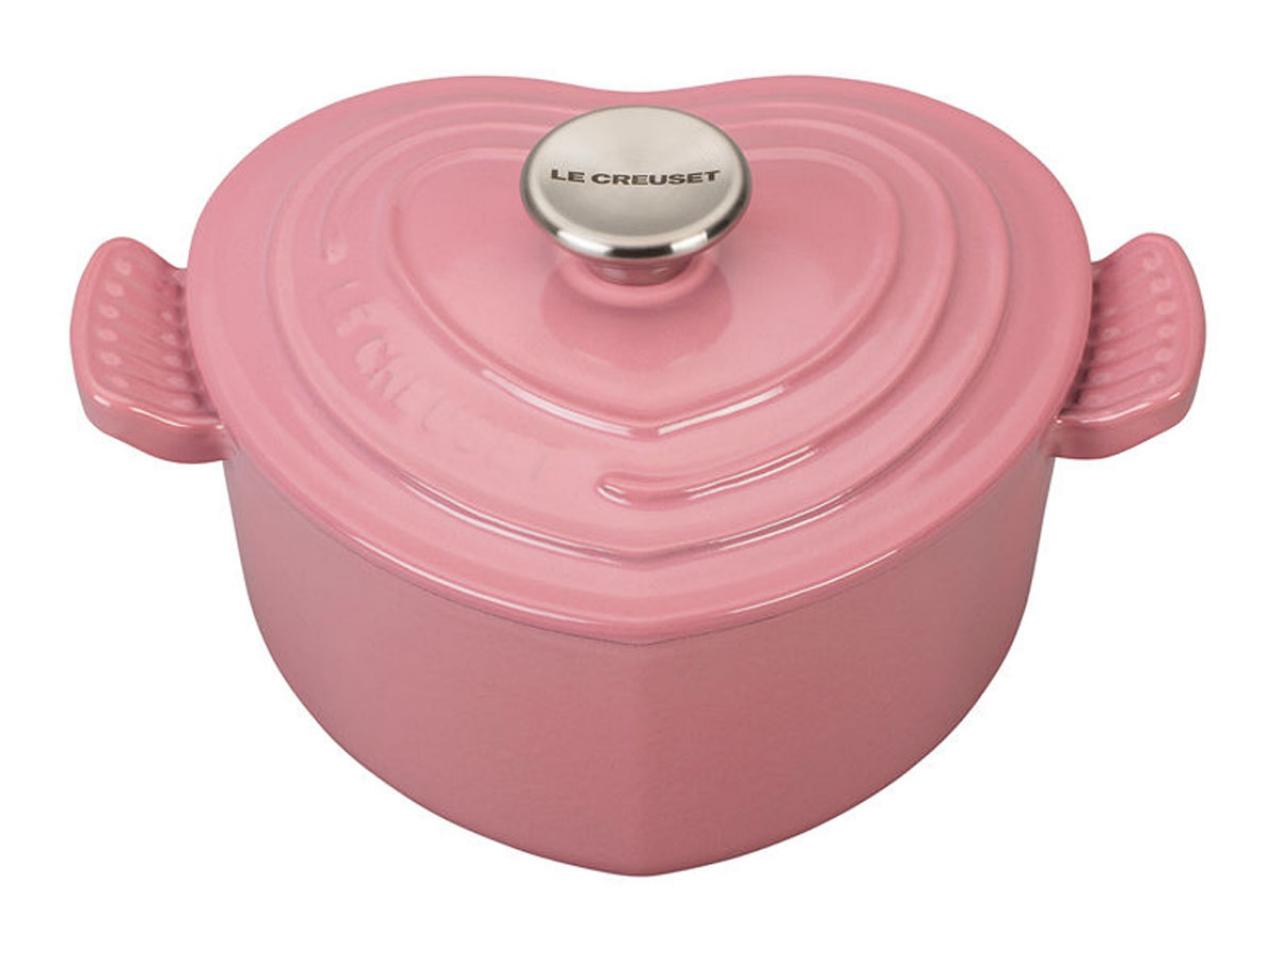 Le Creuset Gift Under $25  FN Dish - Behind-the-Scenes, Food